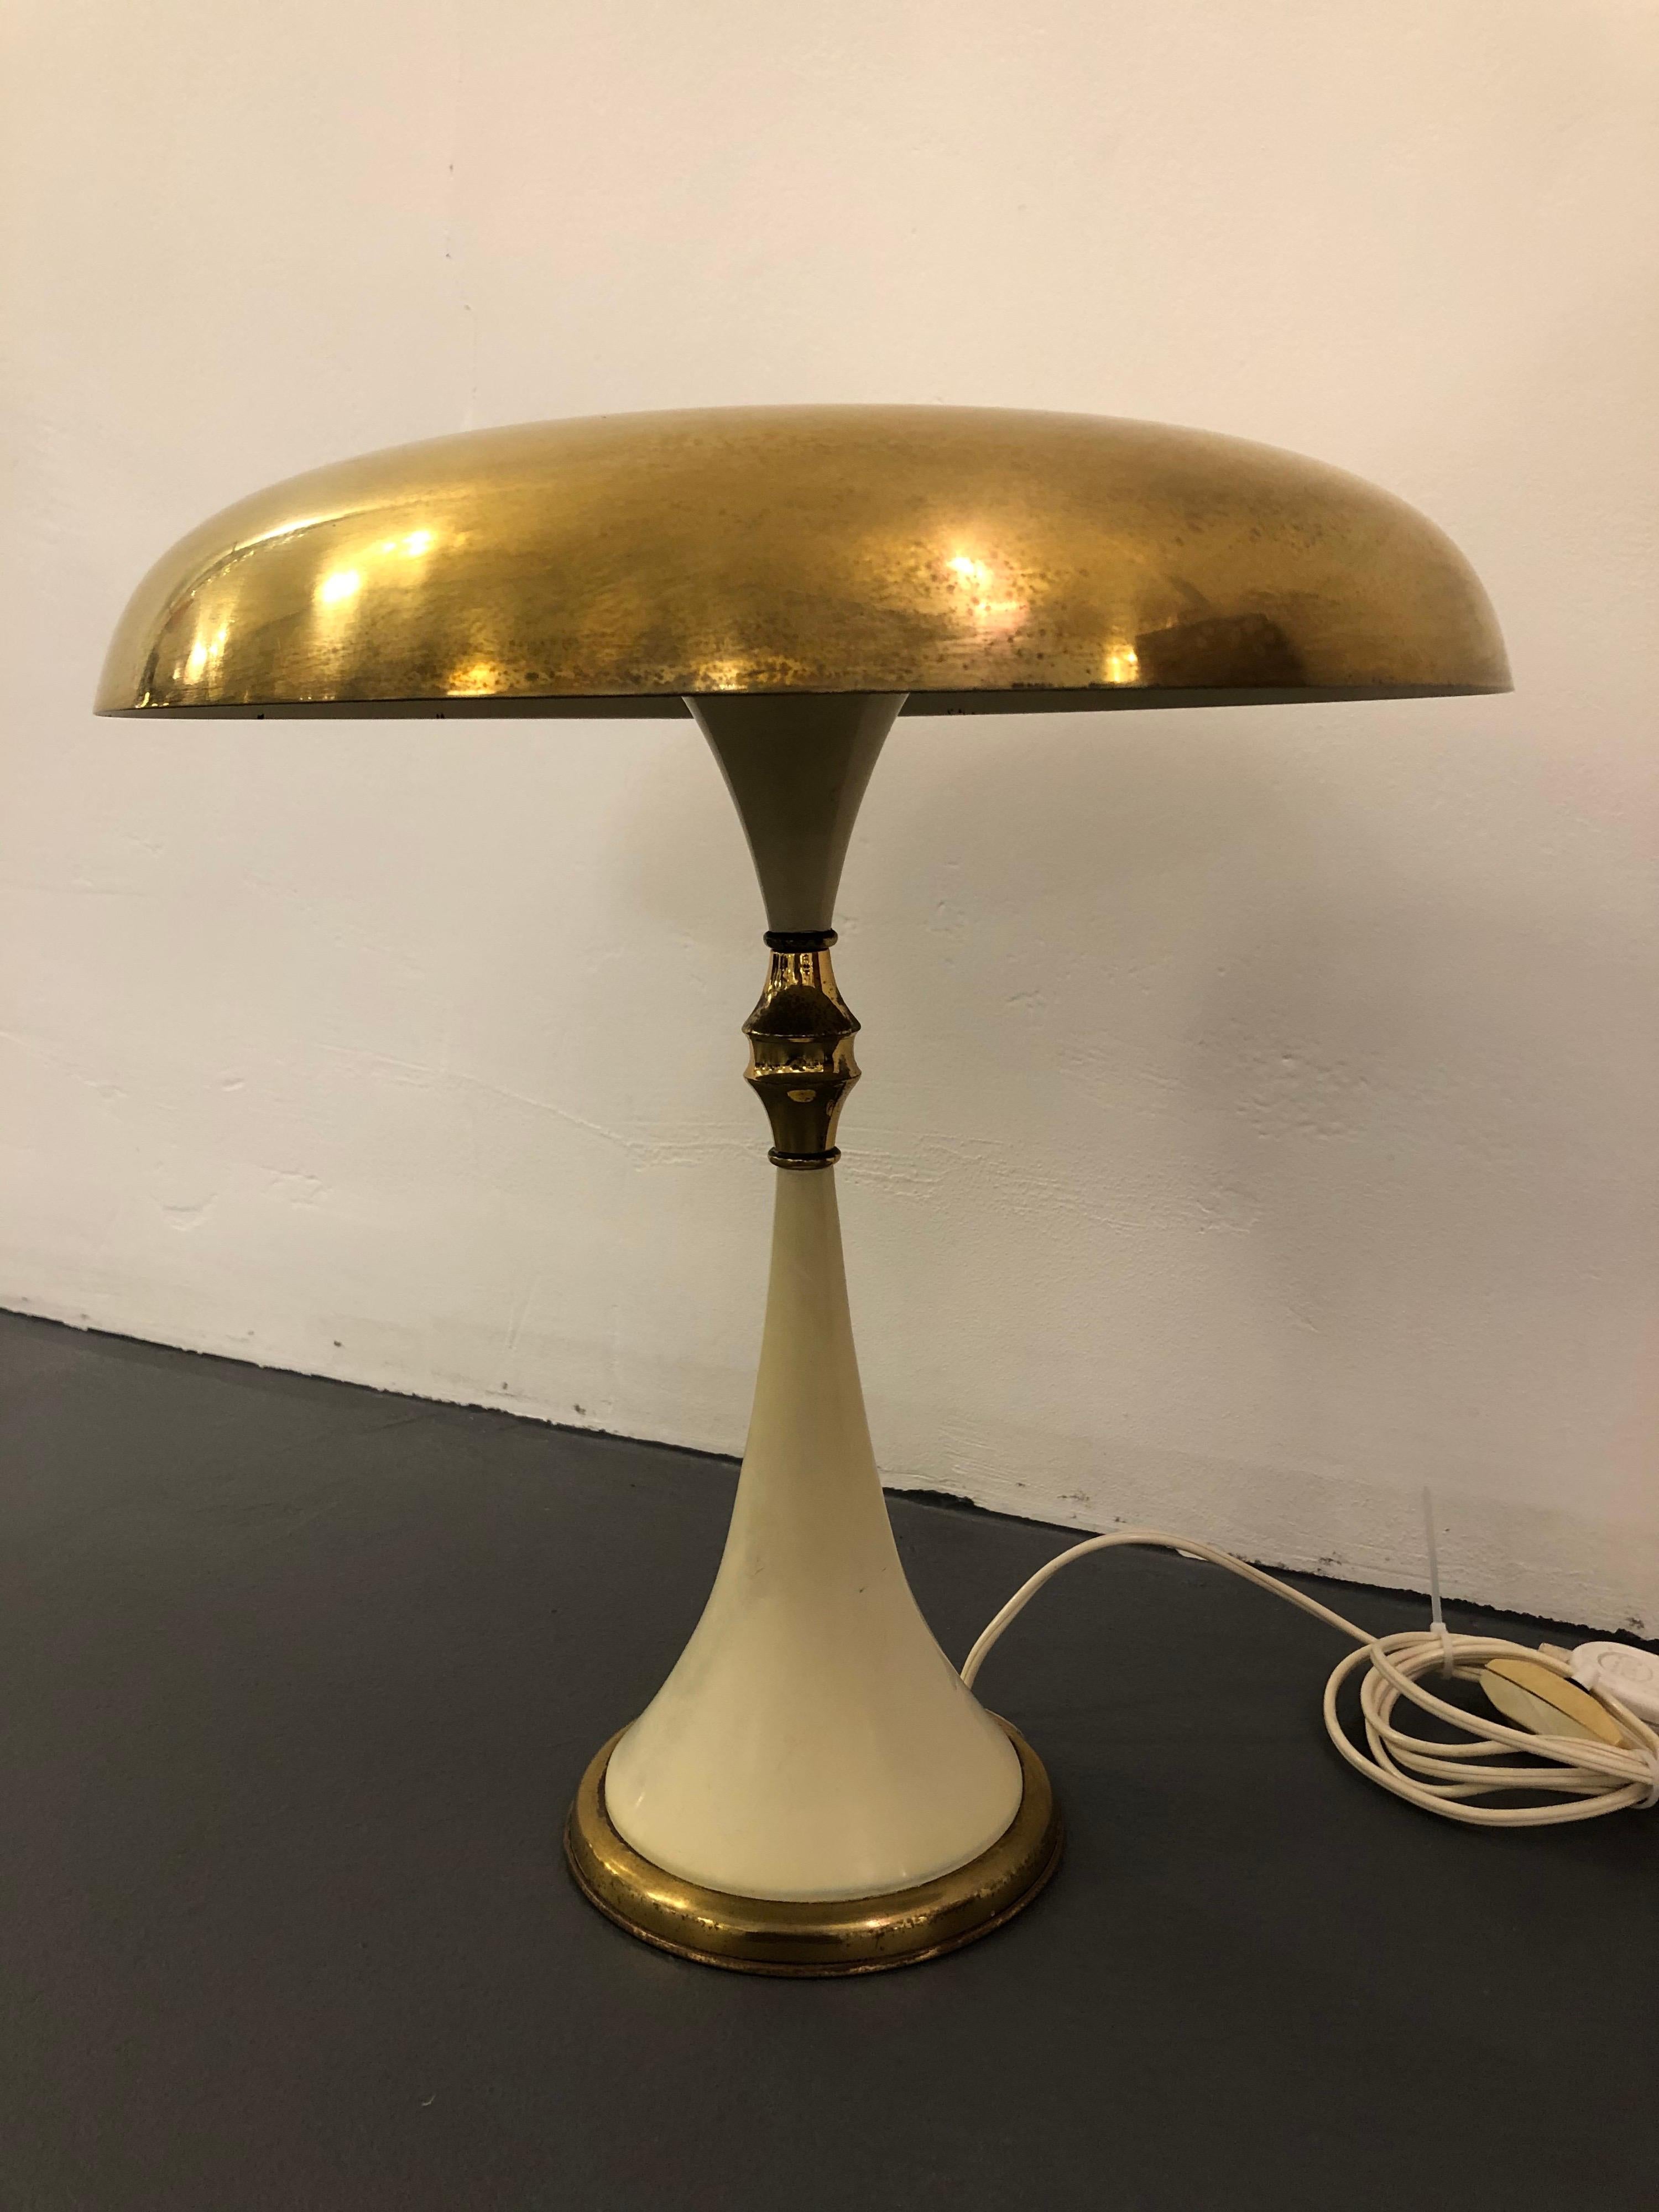 Midcentury Brass and Lacquer Table Lamp by Oscar Torlasco for Lumi, 1950s For Sale 6